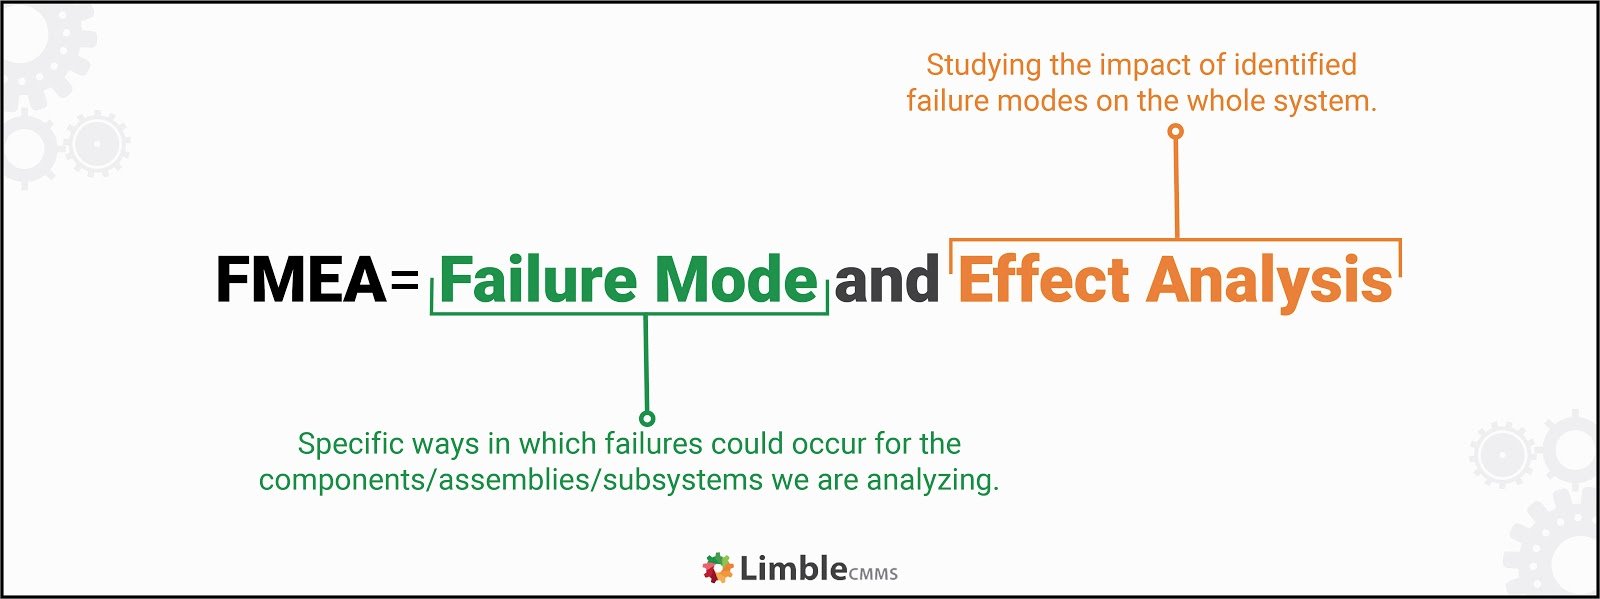 Failure mode effects and analysis (FMEA)